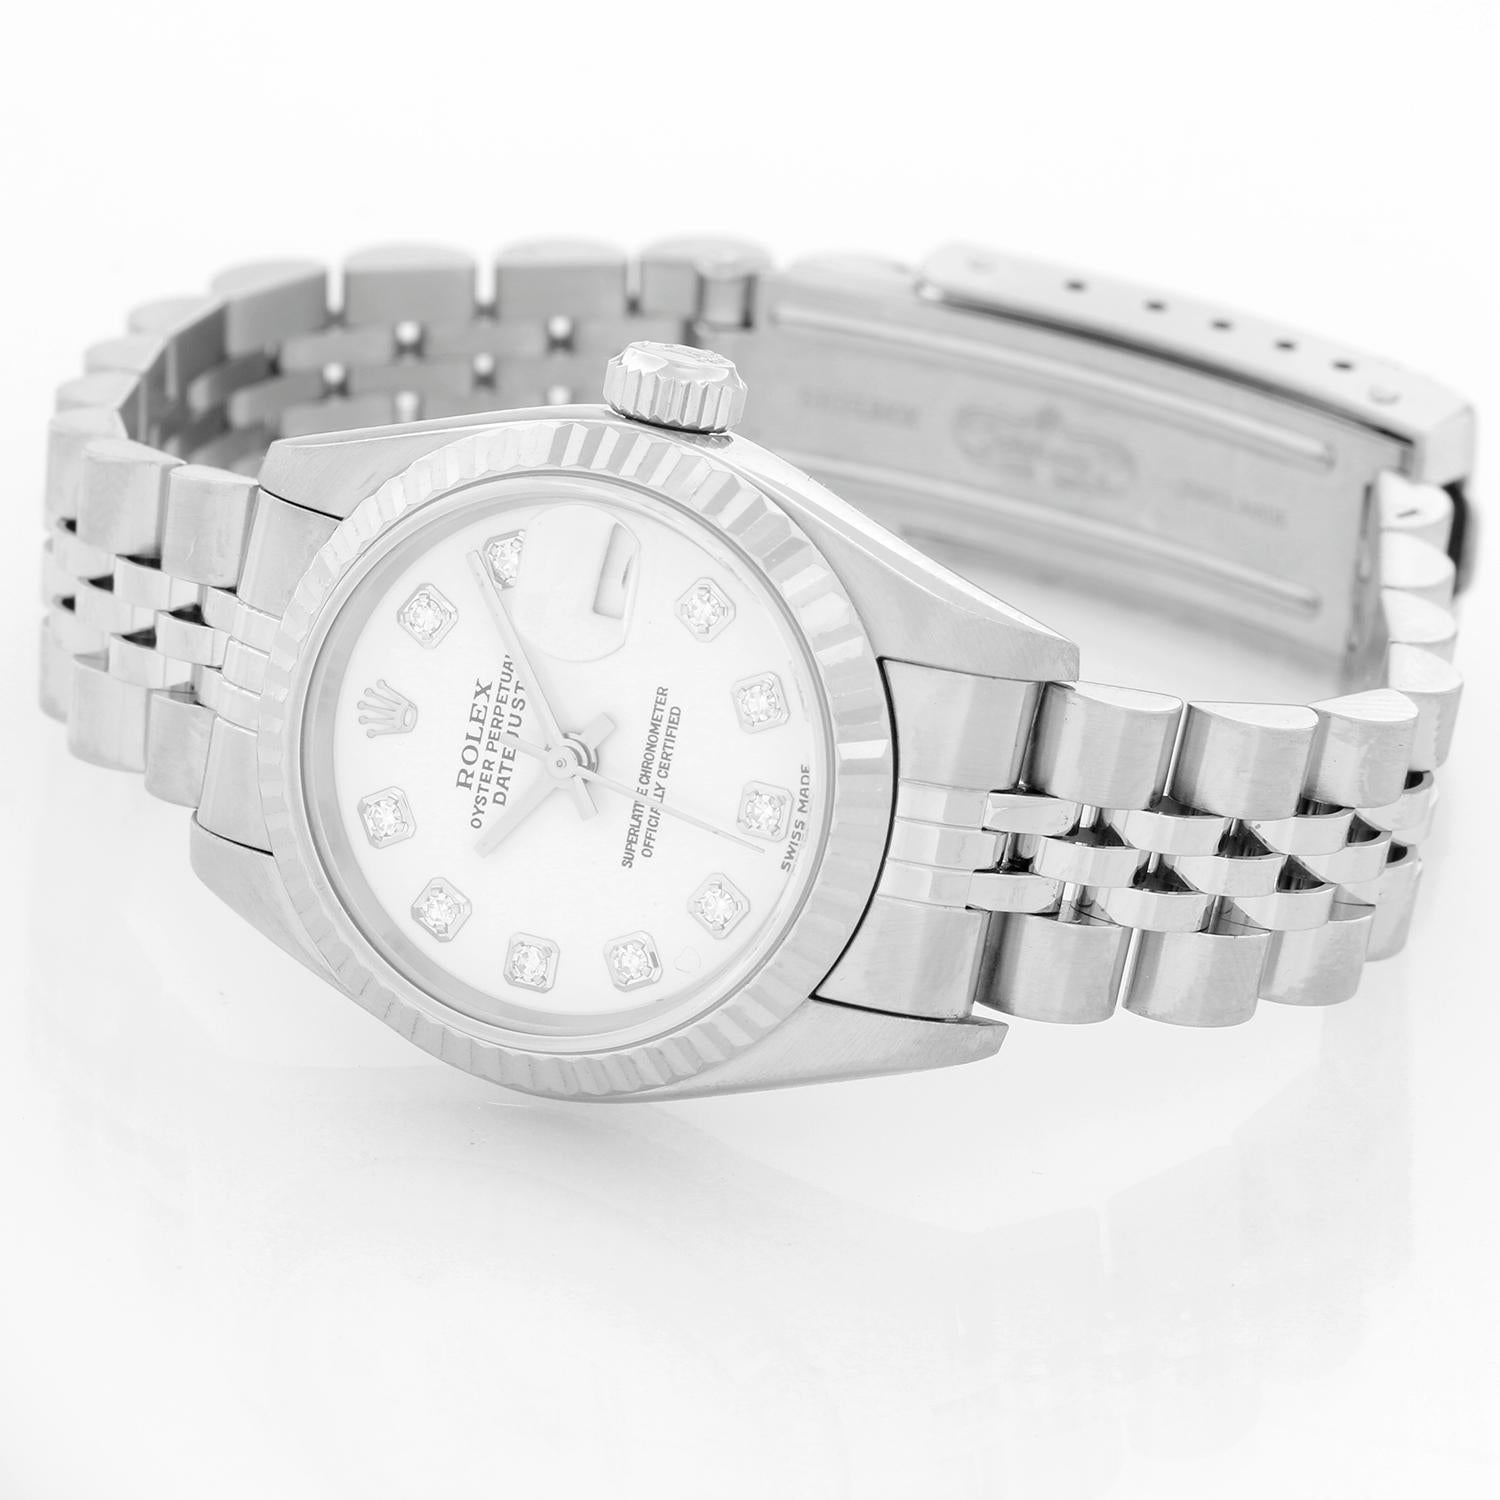 Rolex Ladies Datejust Stainless Steel Watch White Dial 79174 - Automatic winding. Stainless steel case with 18k white gold Fluted bezel (26mm diameter). Factory white diamond dial. Stainless steel Rolex Jubilee bracelet. Pre-owned with custom box